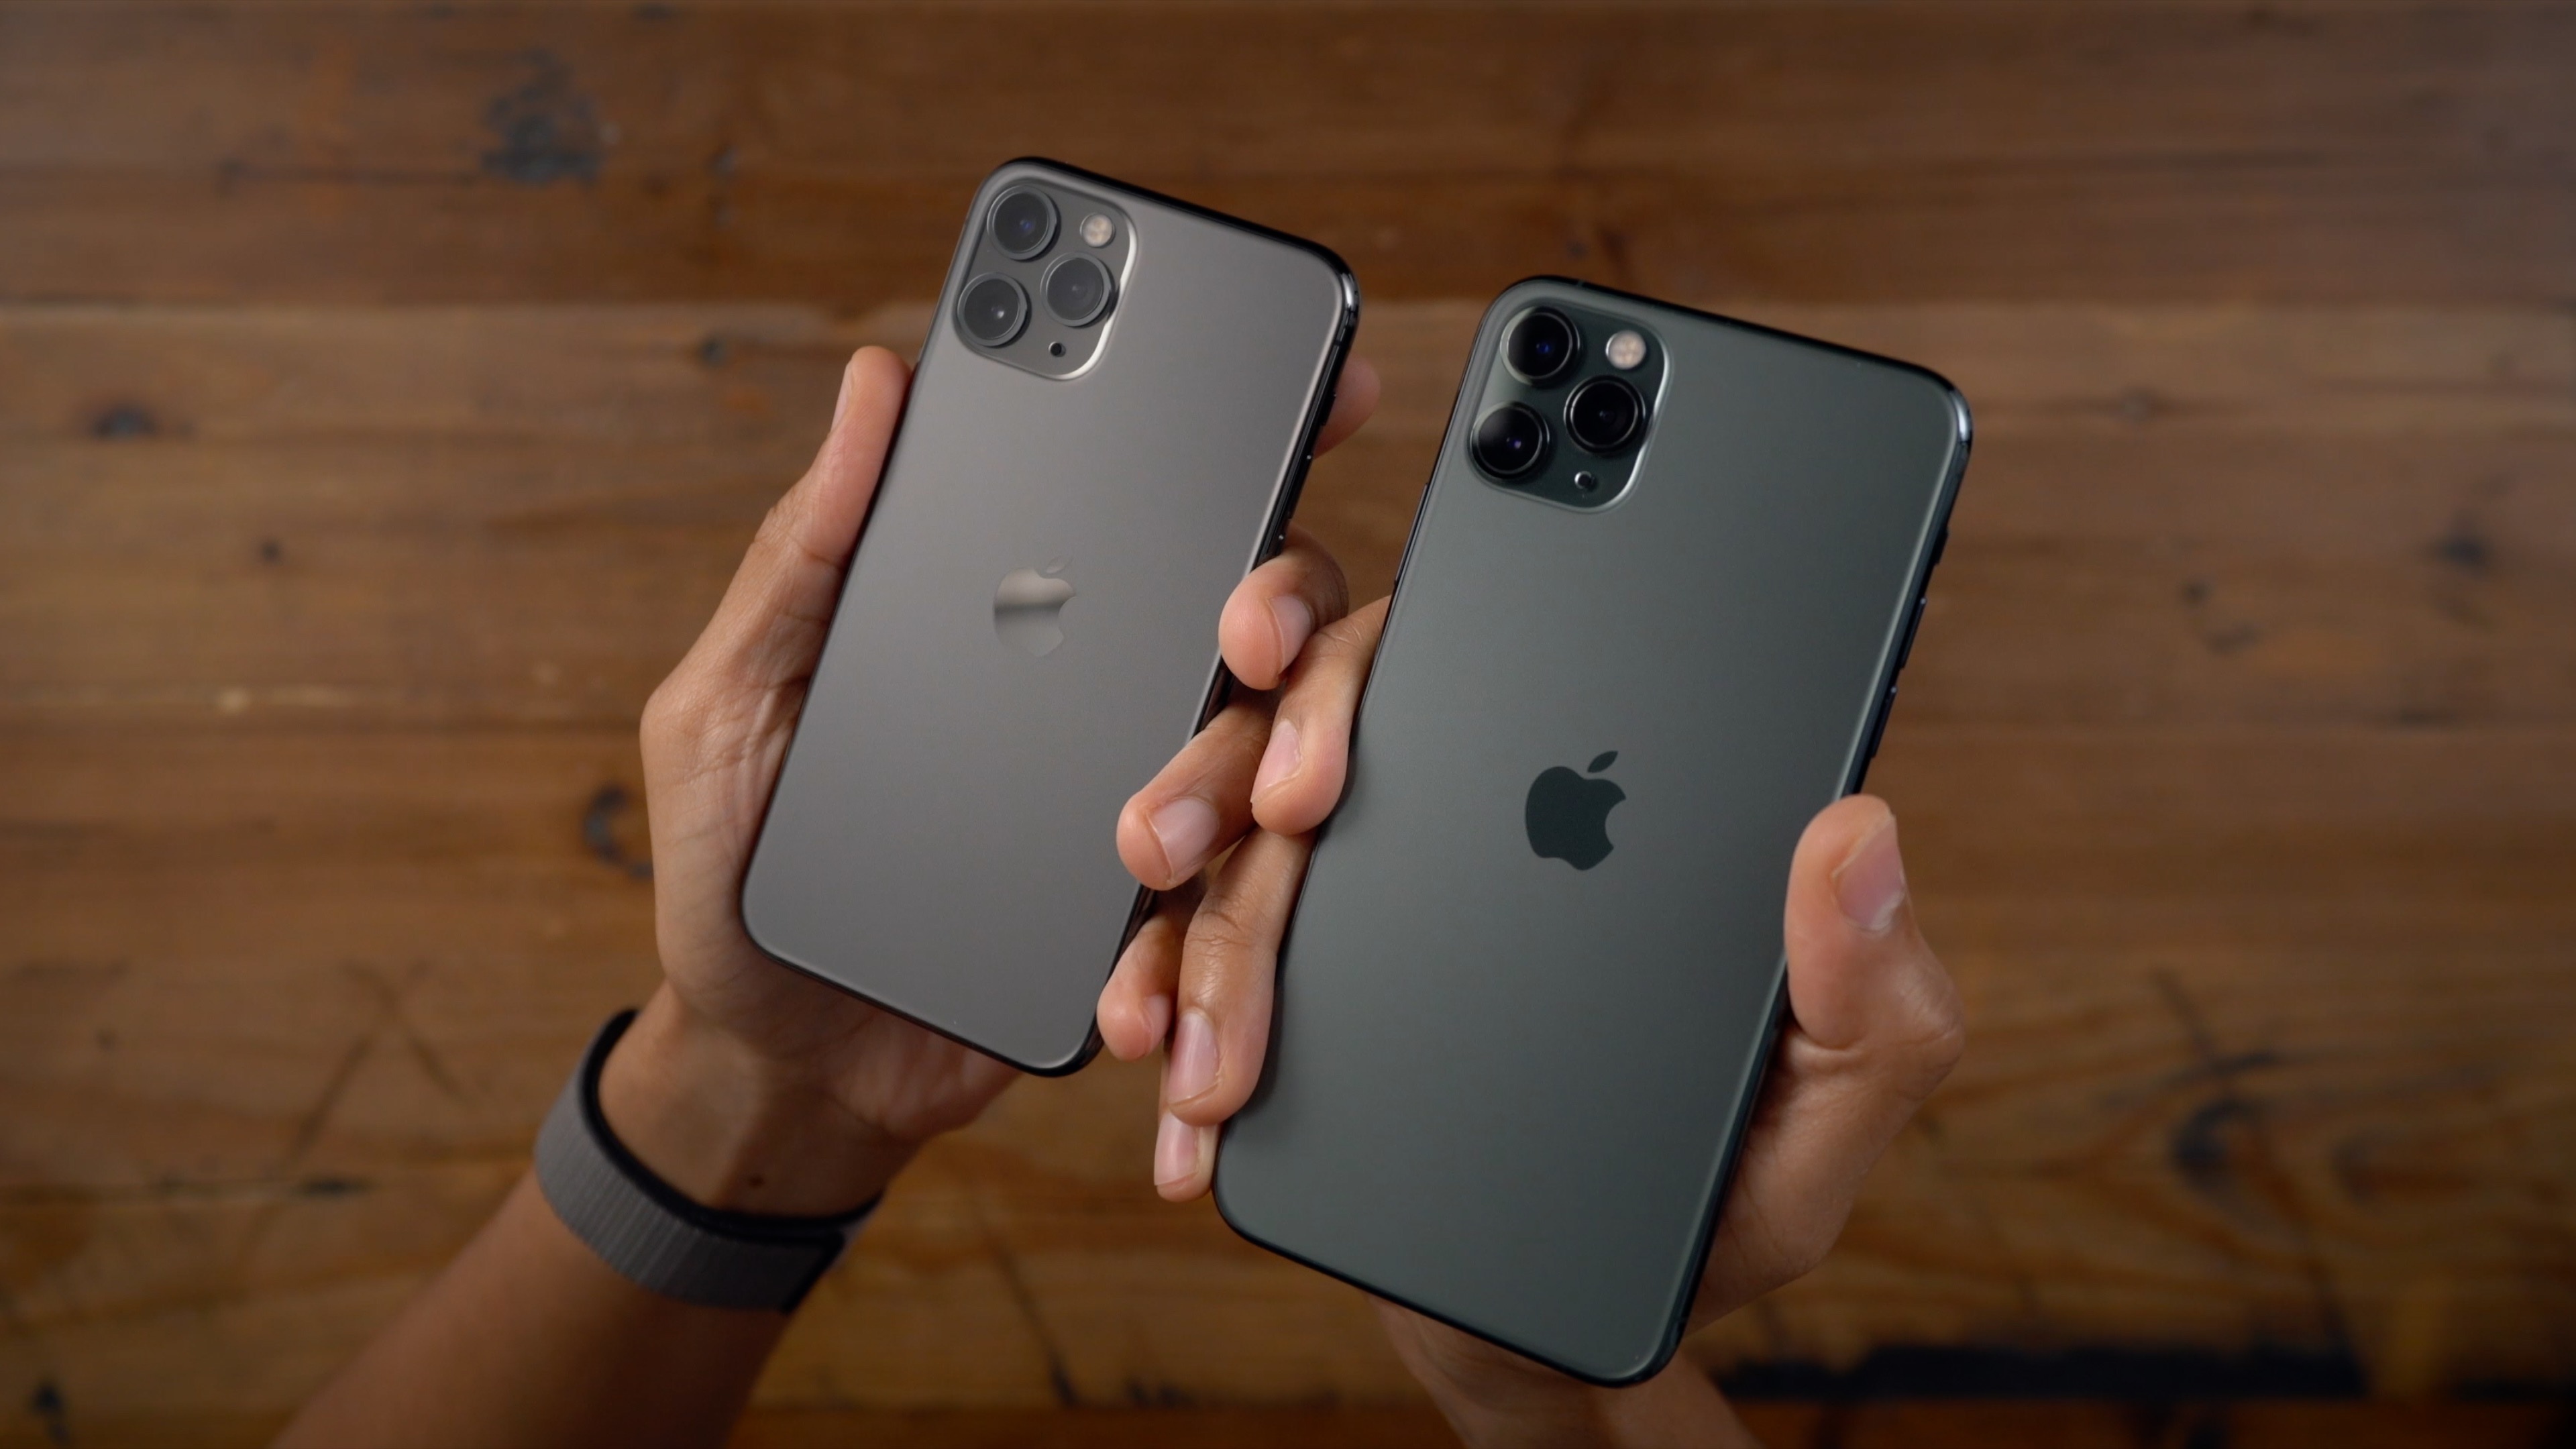 which iphone should i buy in 2019